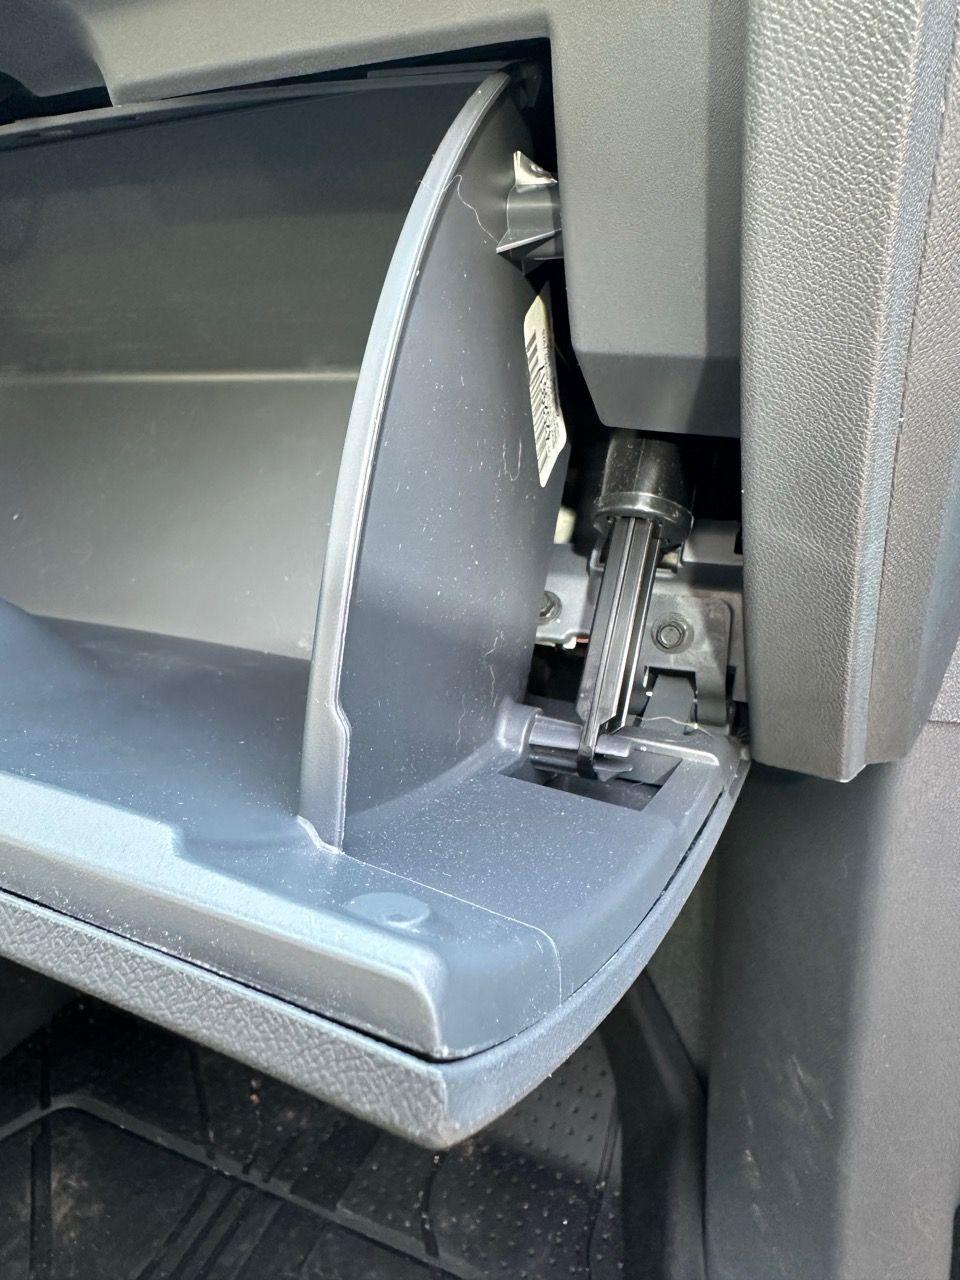 The glove box damper and clip. The glove box is opened.